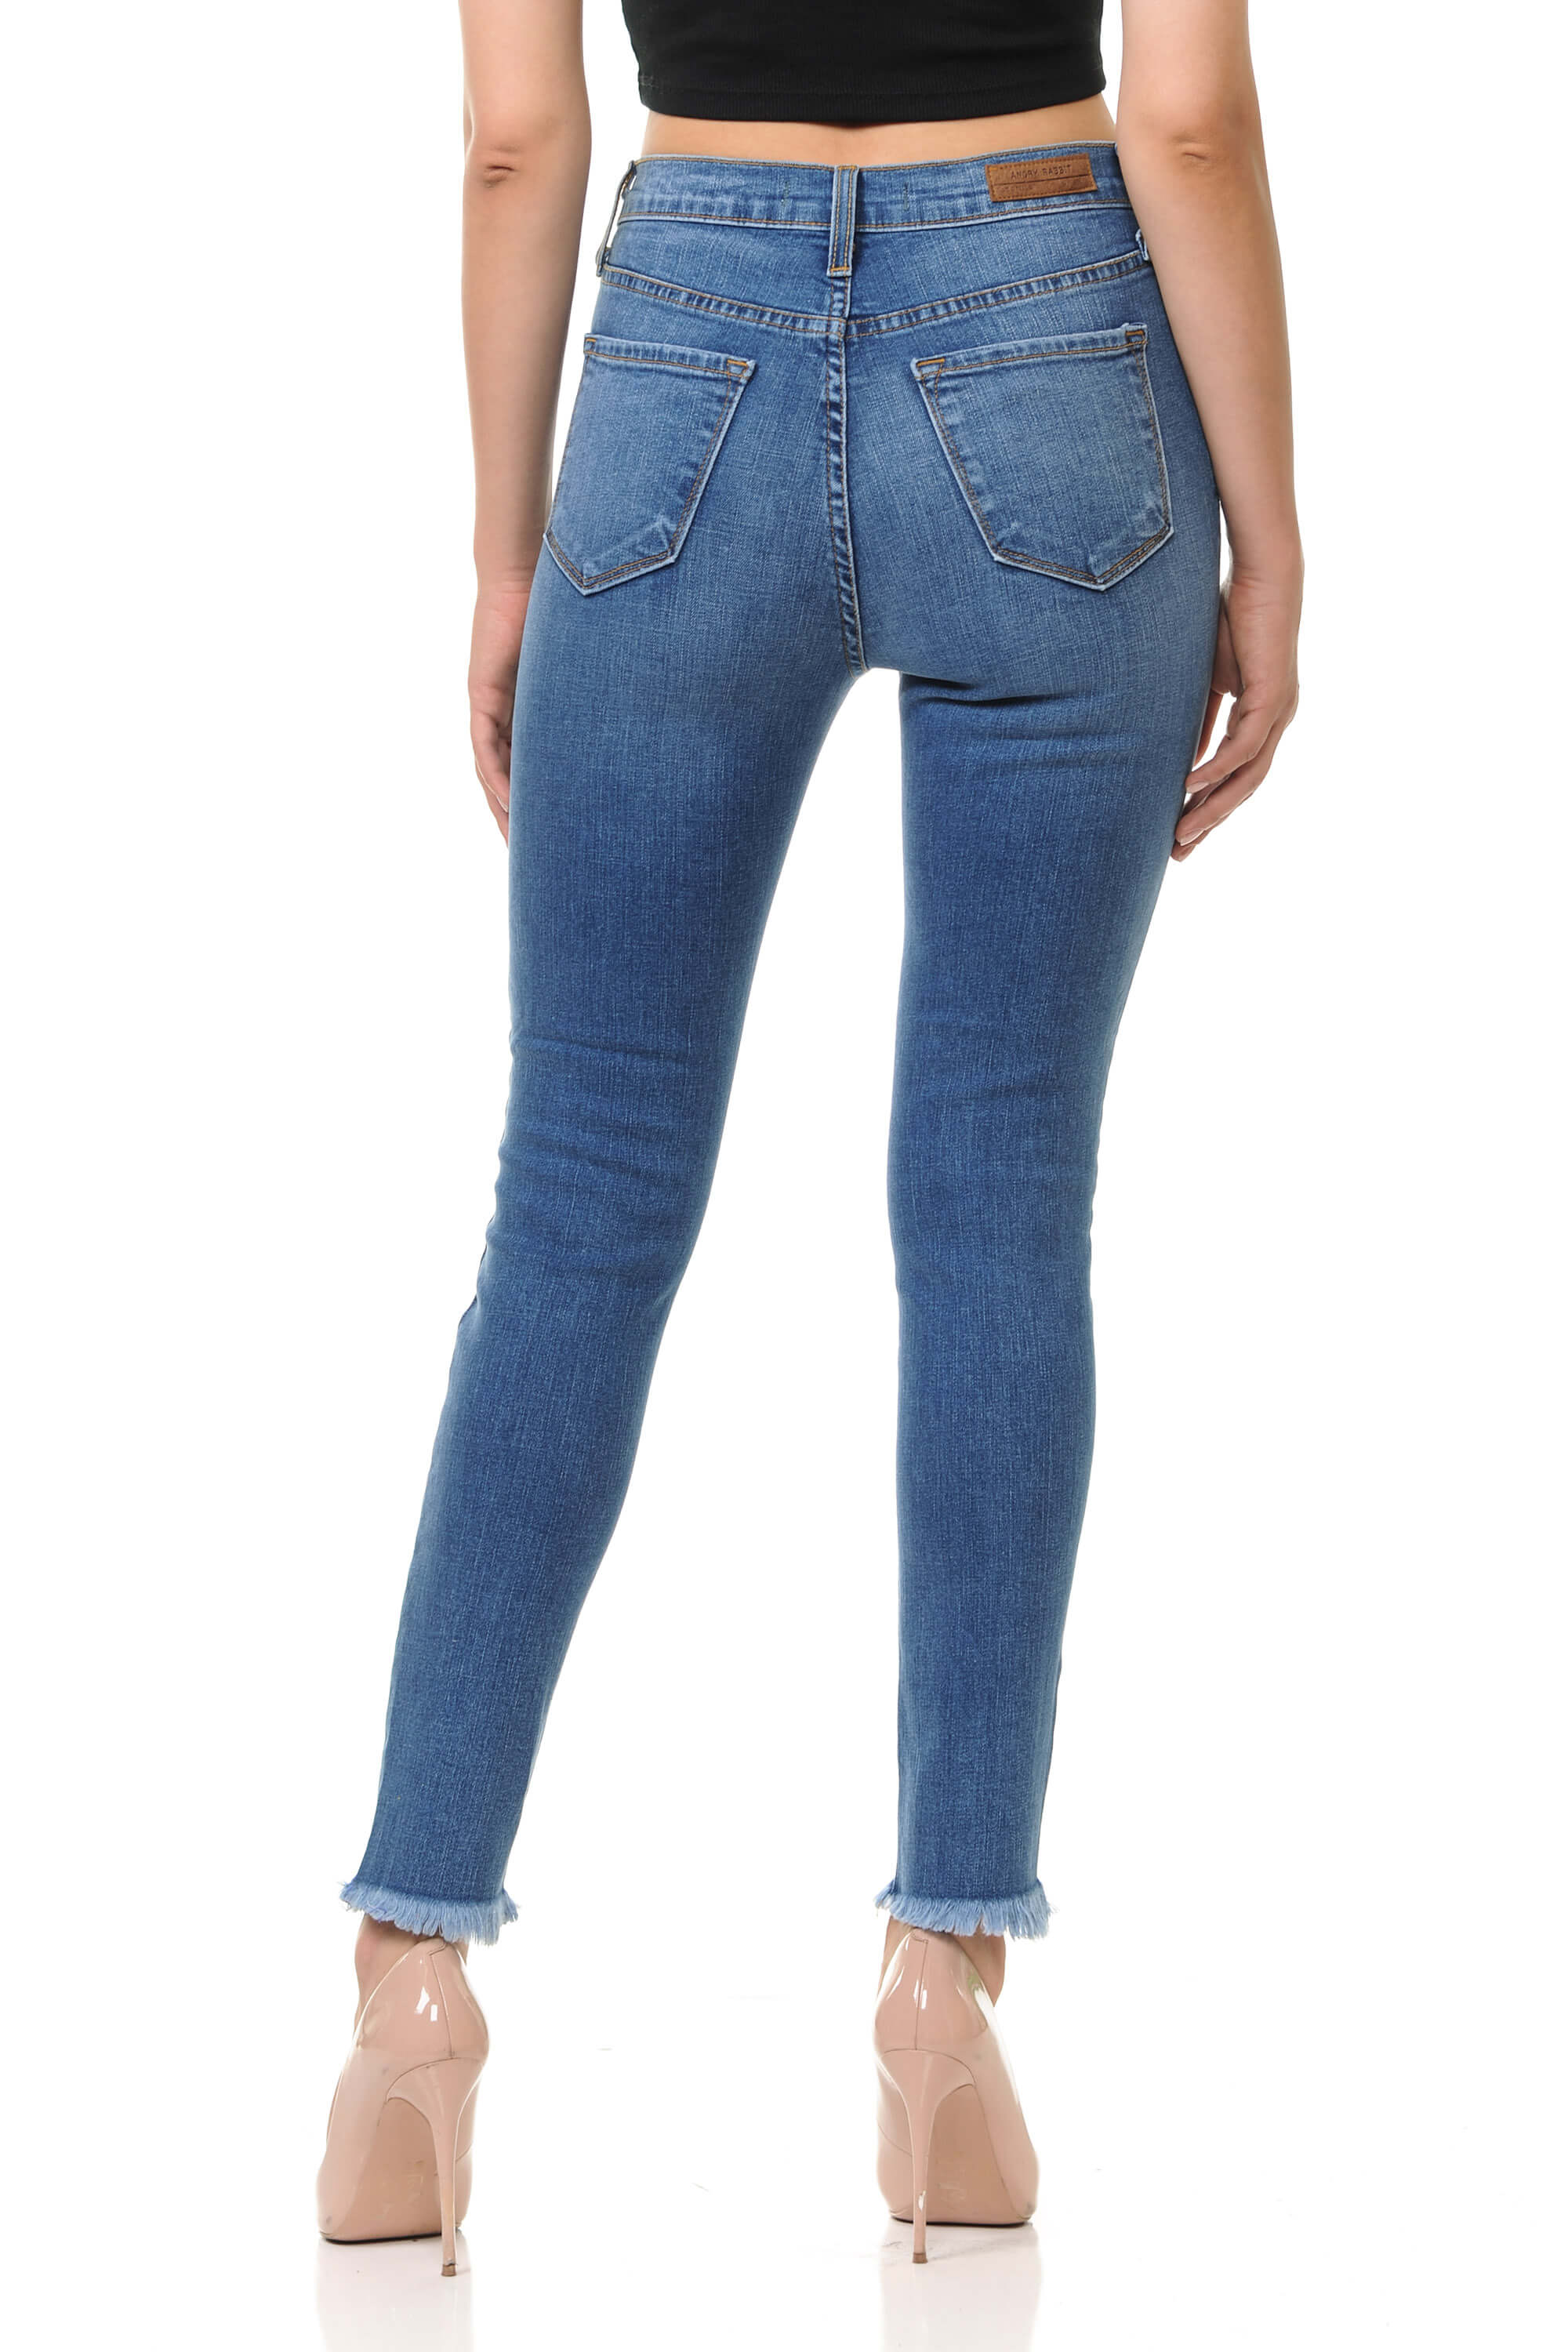 jeans for short legs woman